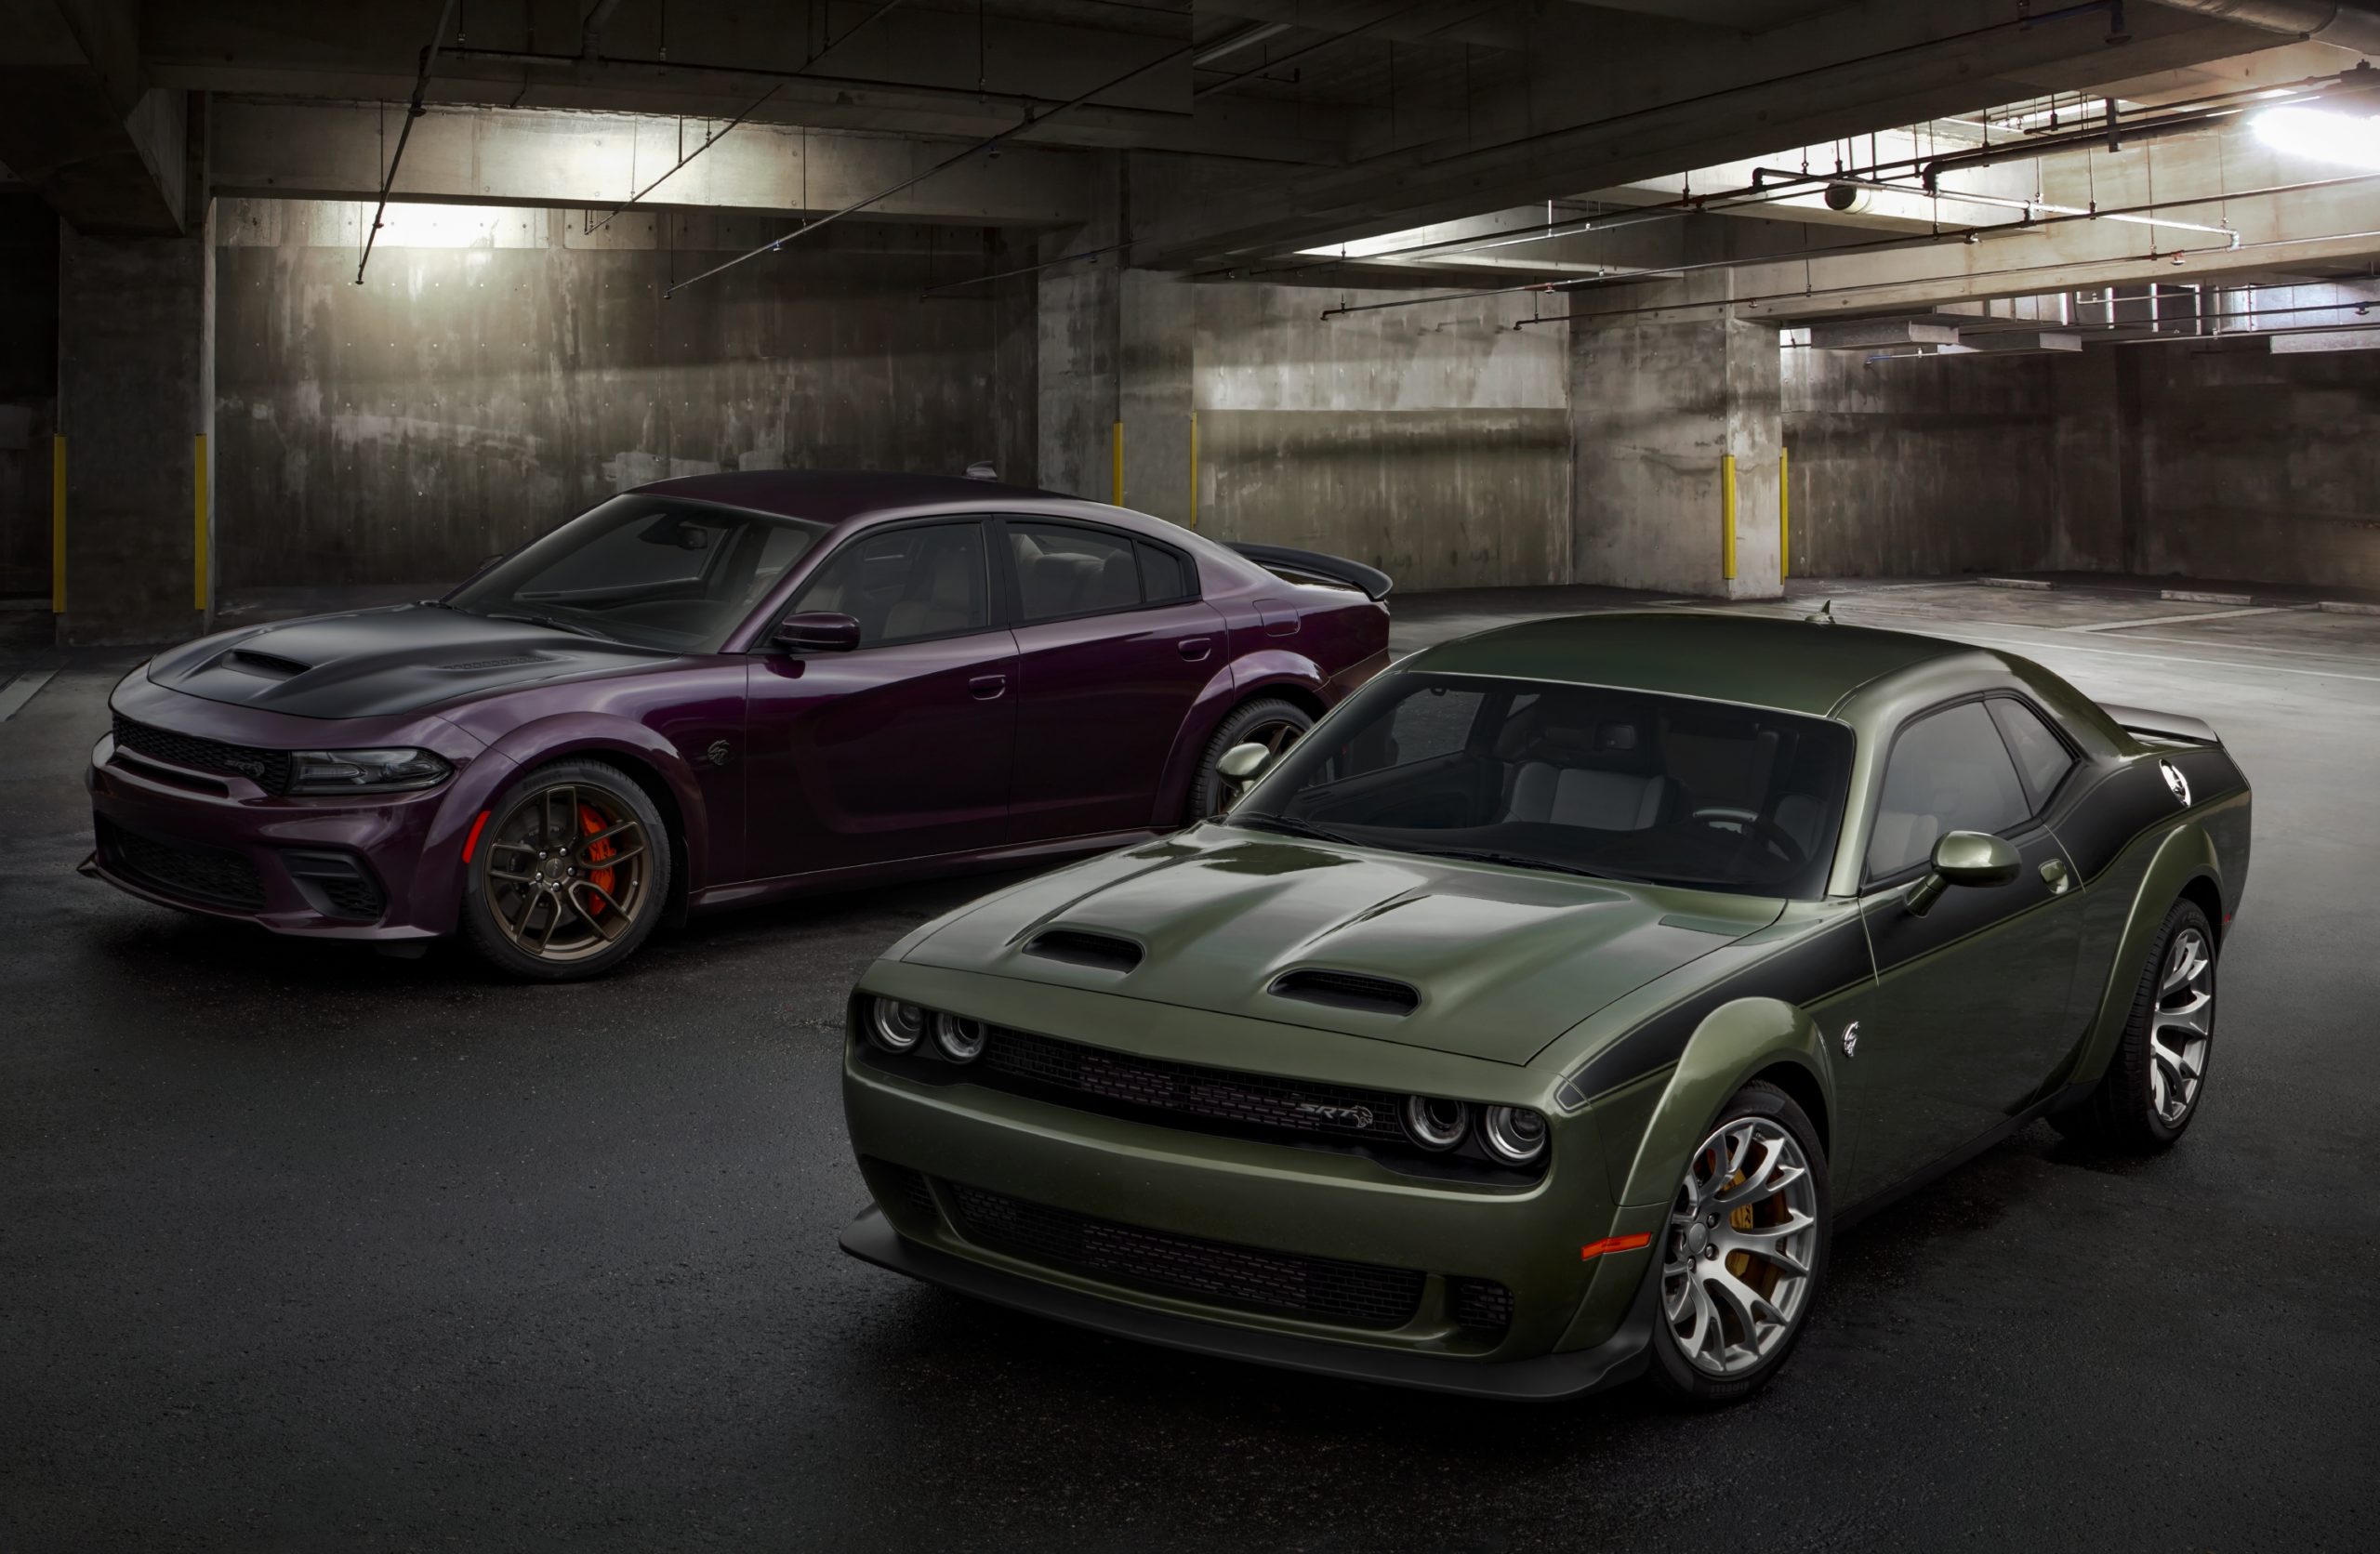 Dodge Adds New Customization Options with Jailbreak Models | THE SHOP